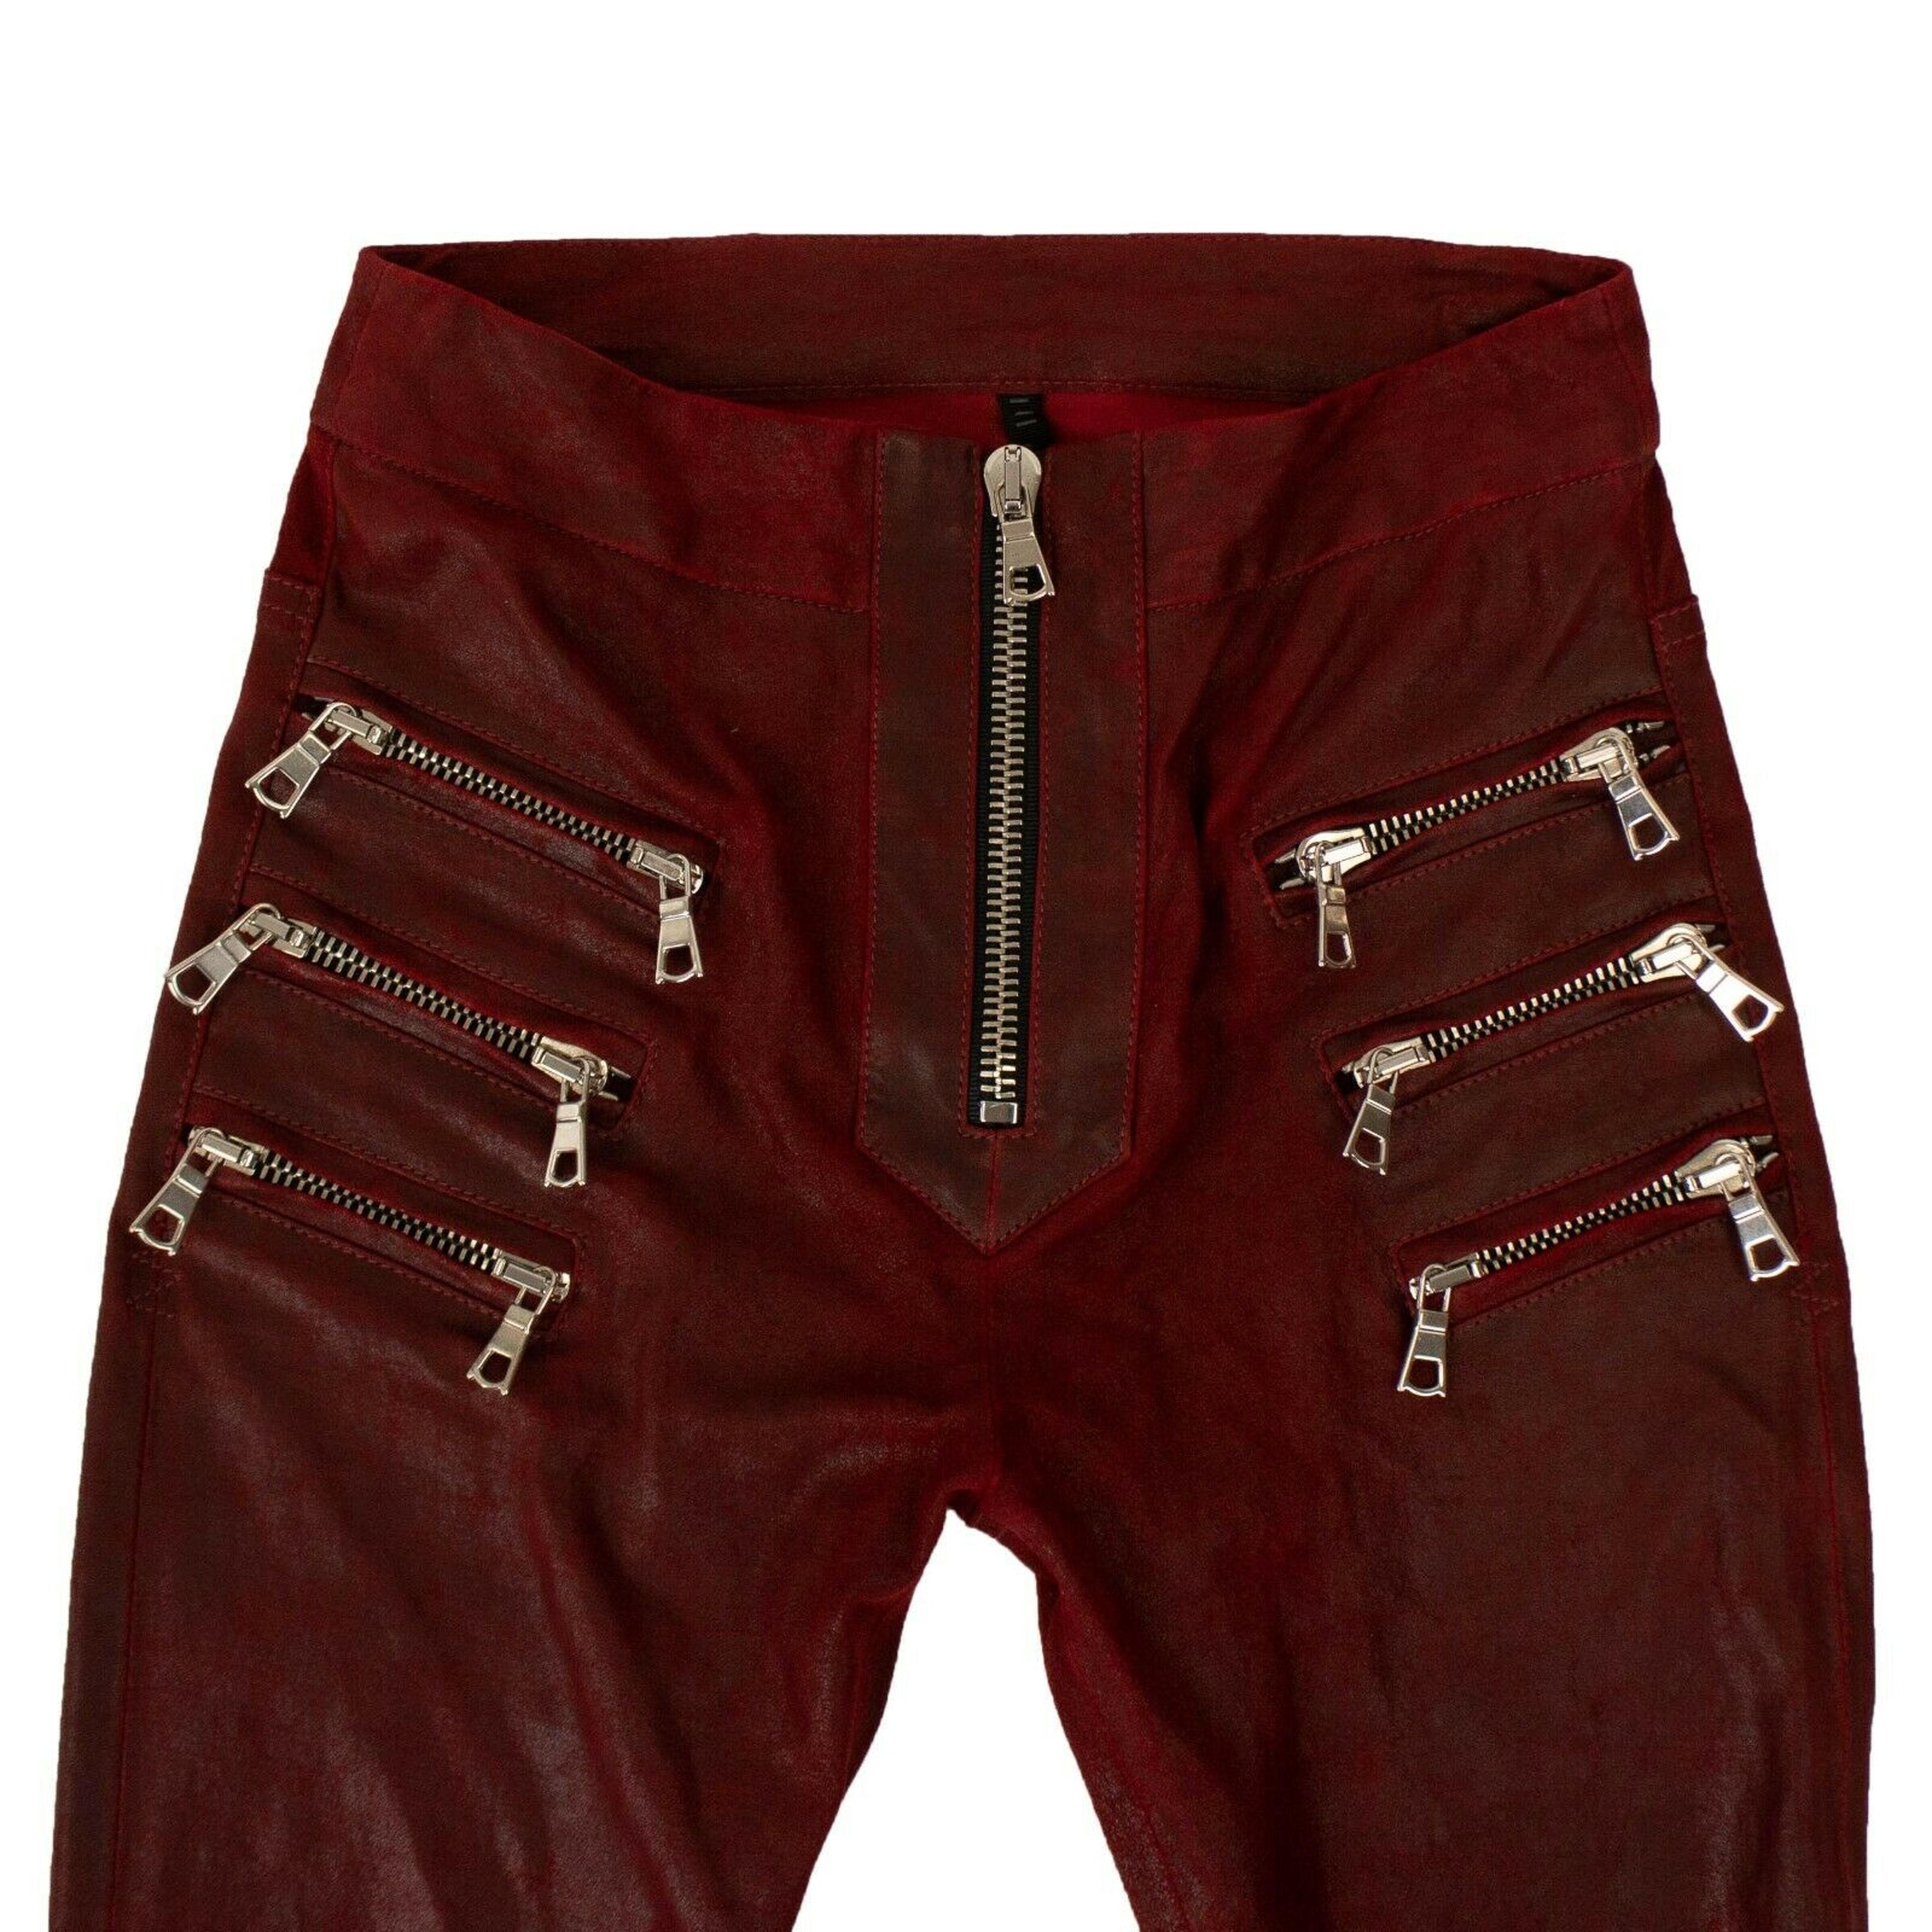 Alternate View 2 of Red Textured Skinny Pants